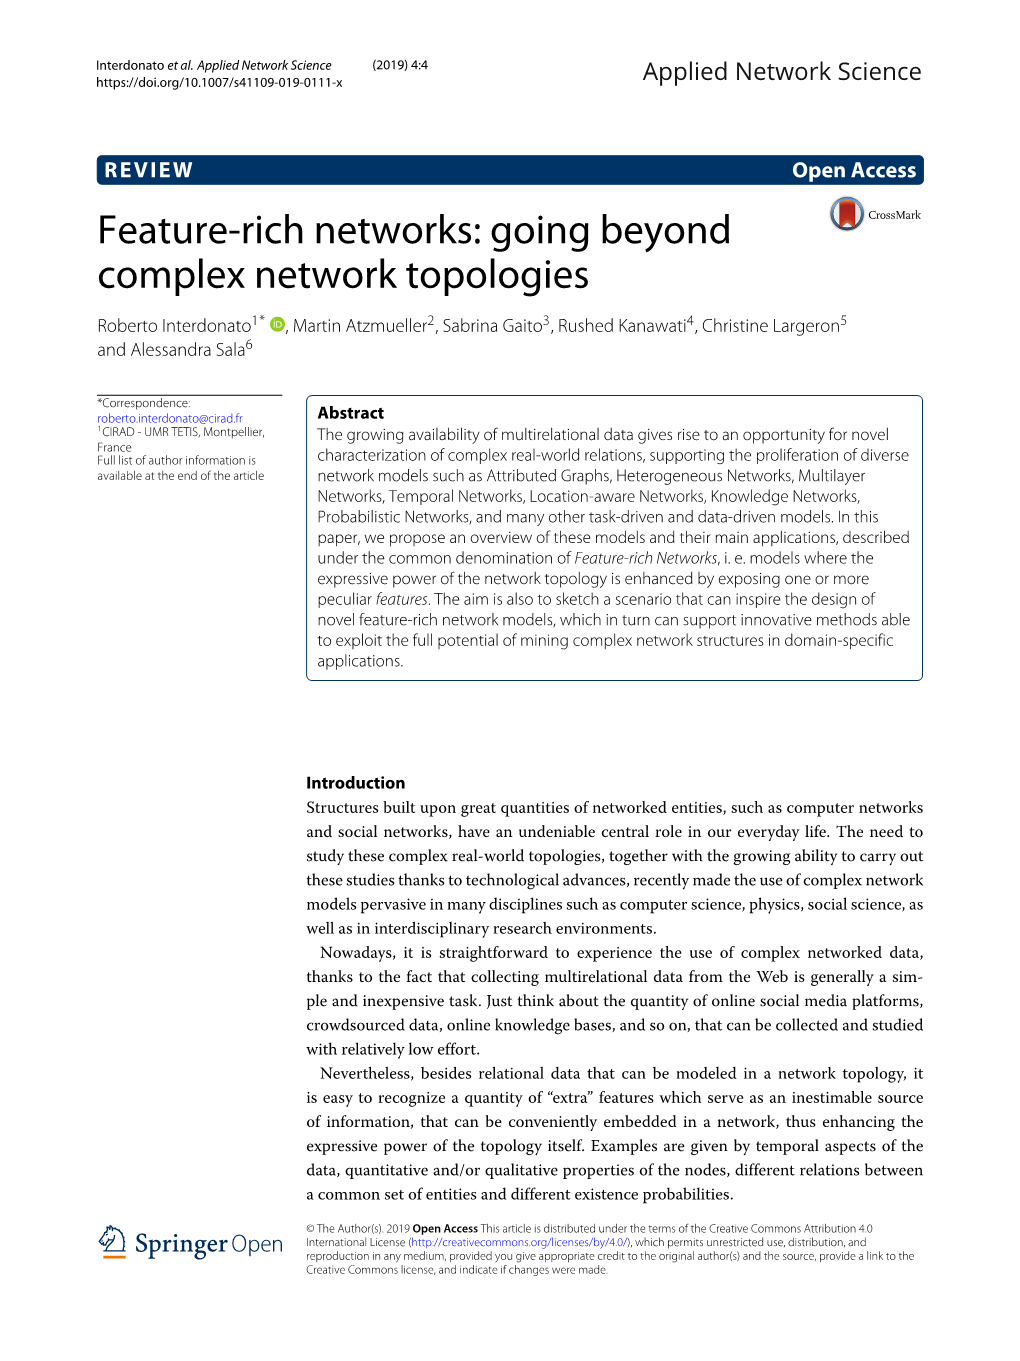 Feature-Rich Networks: Going Beyond Complex Network Topologies